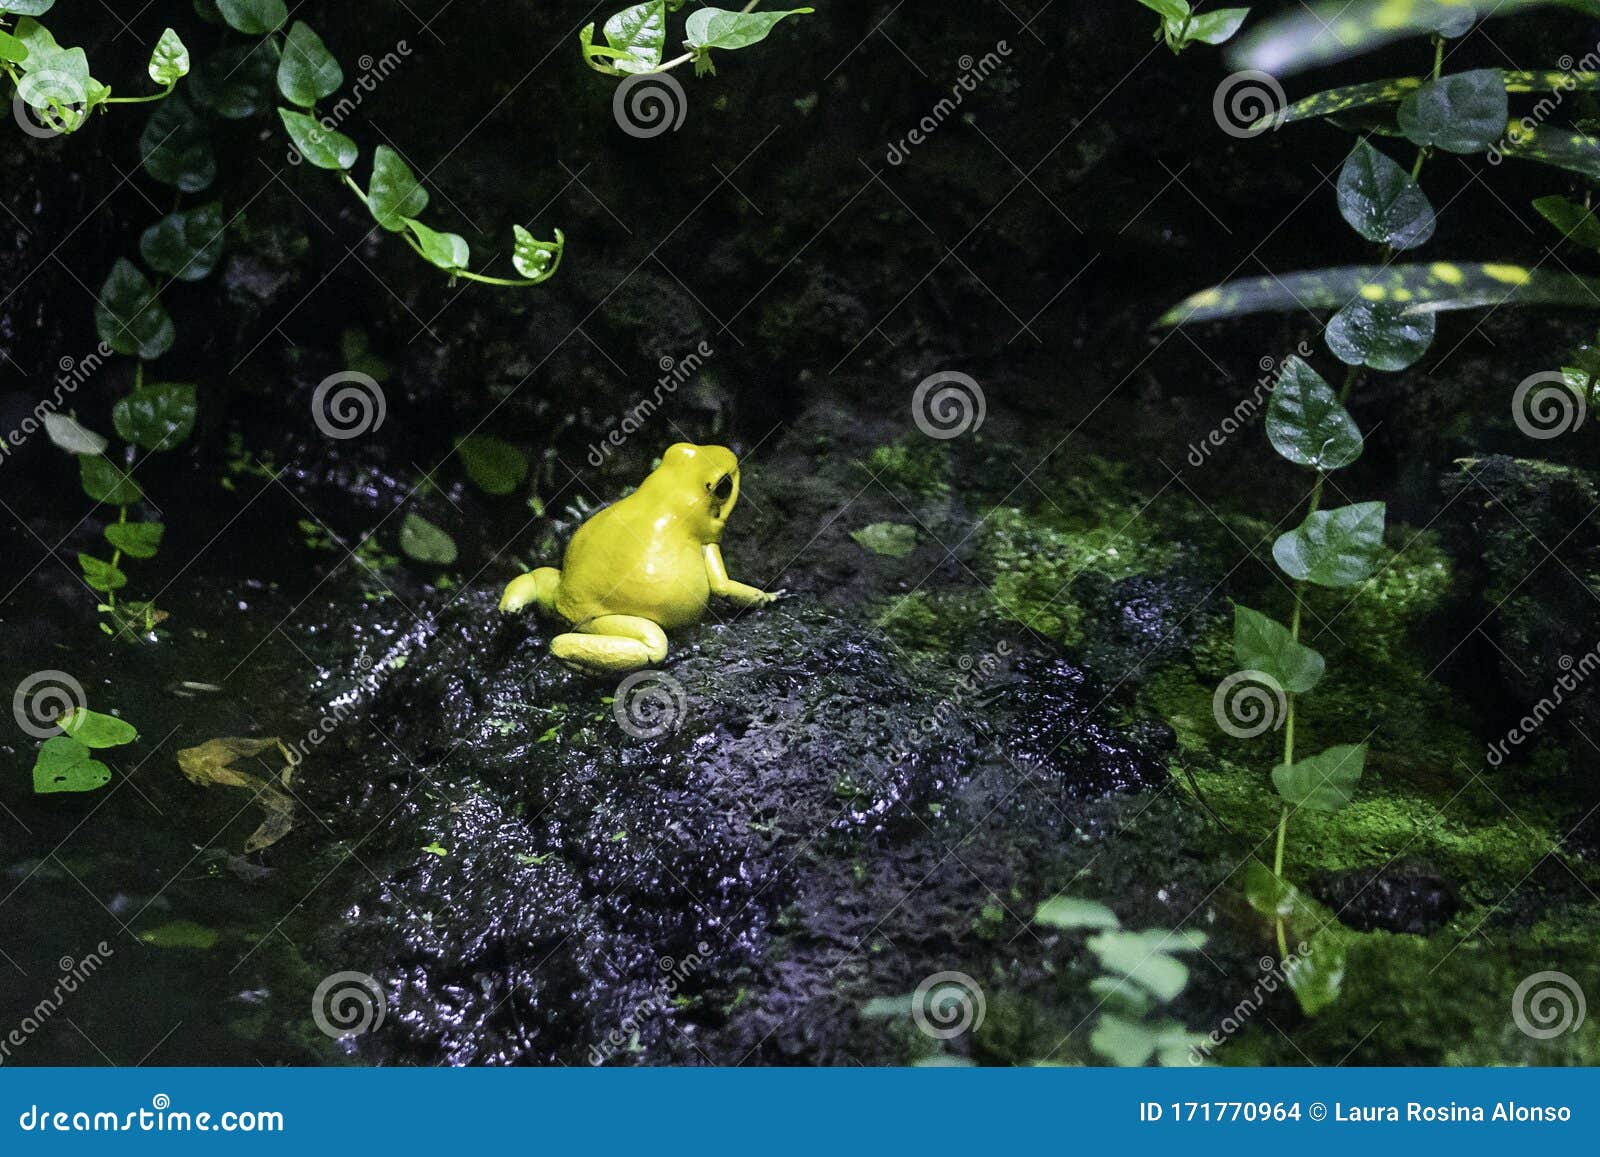 yellow frog in a small water pond